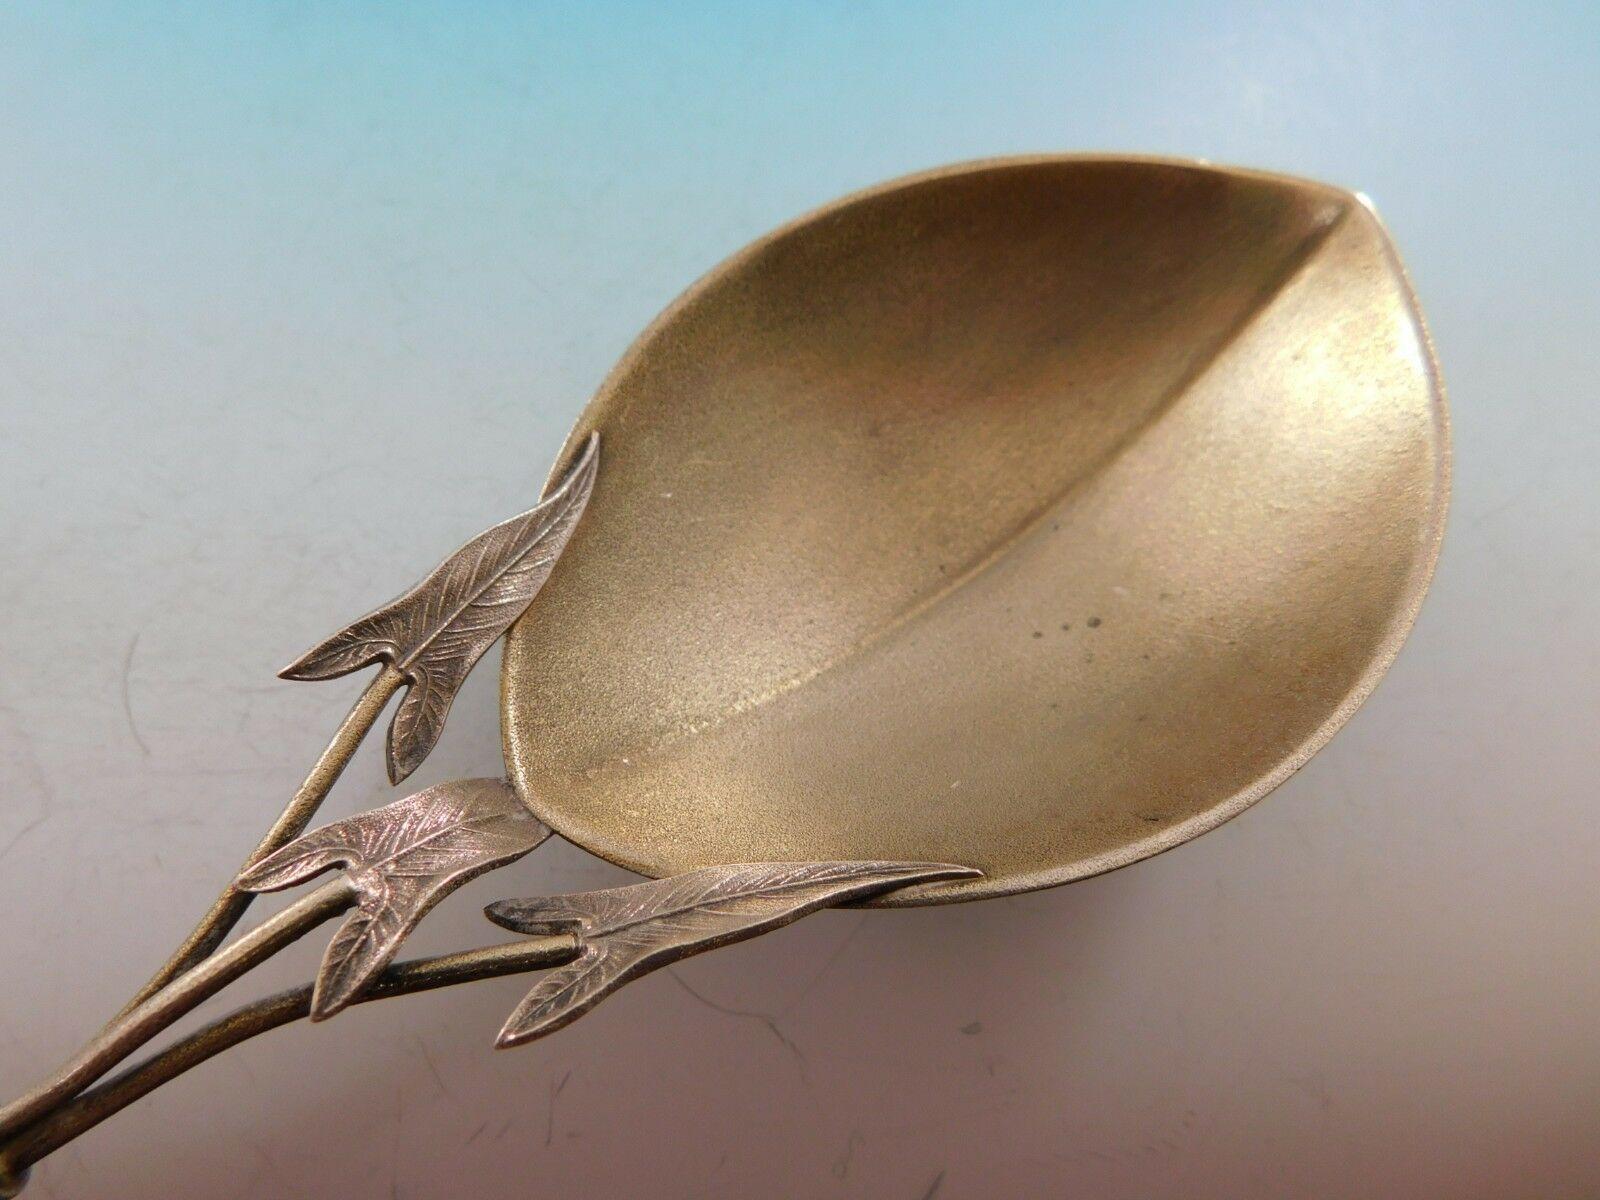 Calla Lily by Whiting

Truly exceptional sterling silver berry spoon measuring 10 3/4